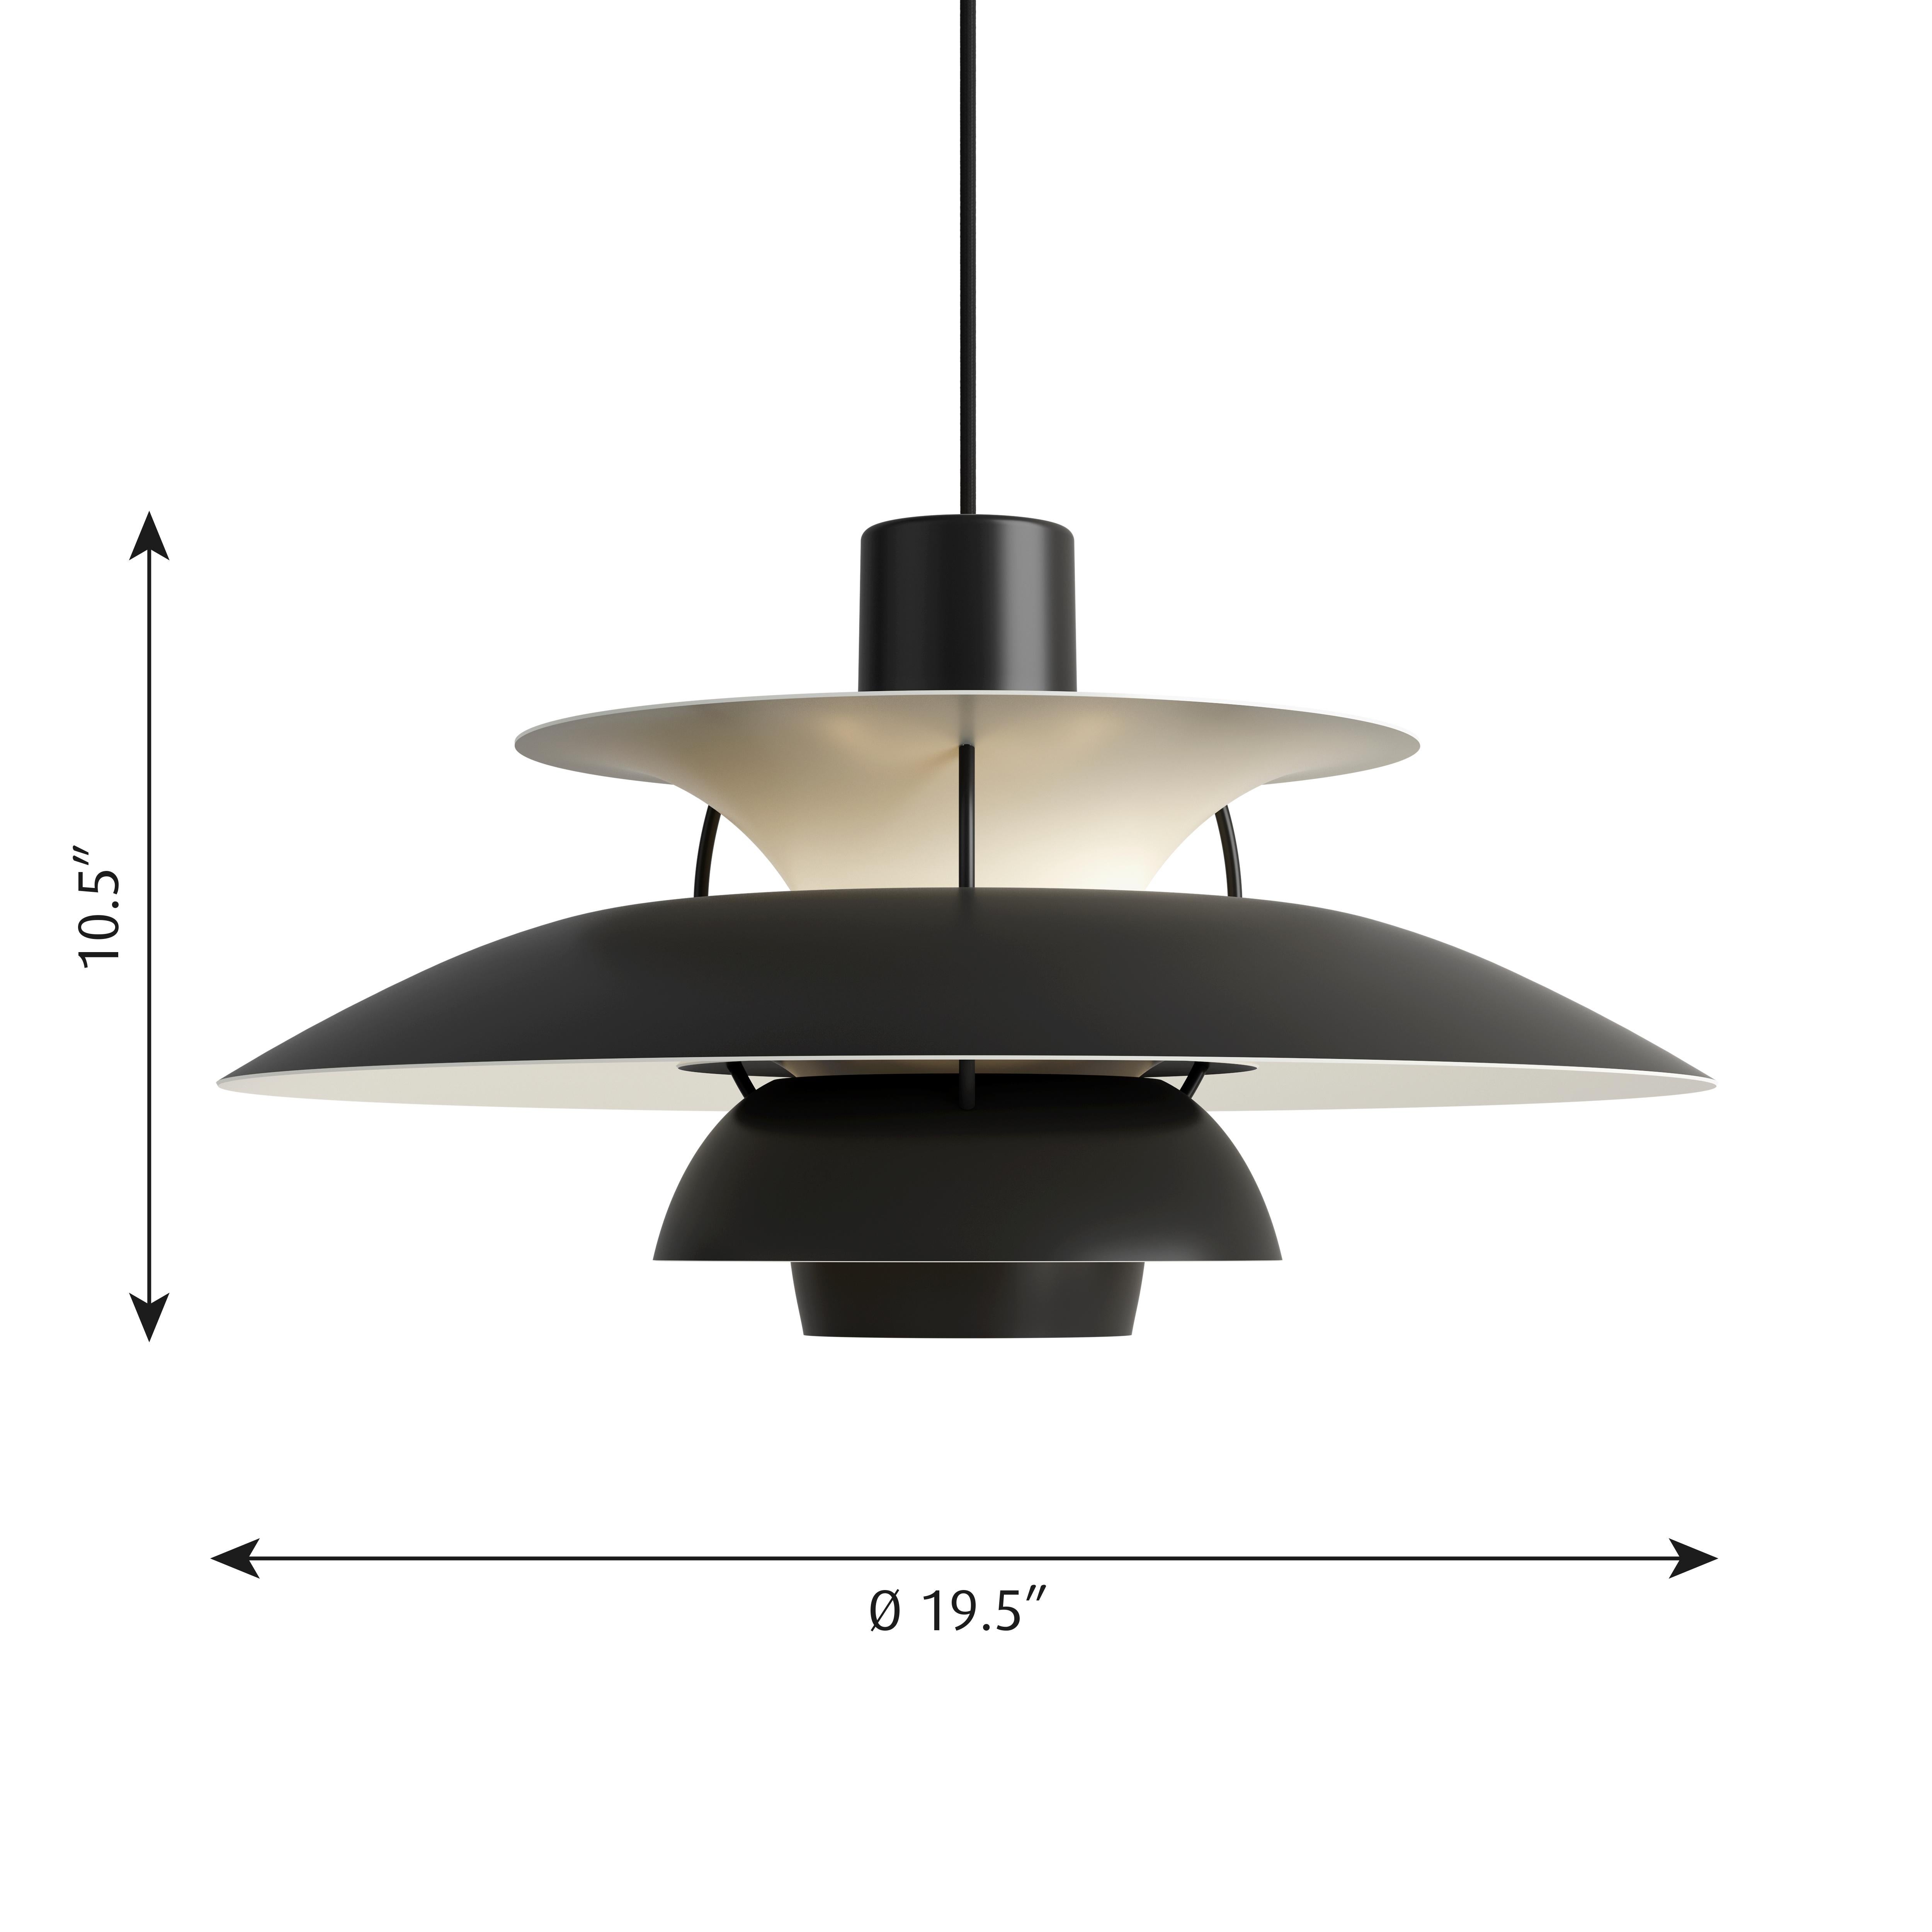 Poul Henningsen PH 5 pendant for Louis Poulsen in all black. Poul Henningsen introduced his iconic PH 5 pendant light in 1958. Six decades later, the PH 5 remains the bestselling design in the Louis Poulsen's portfolio. The PH 5's painted metal